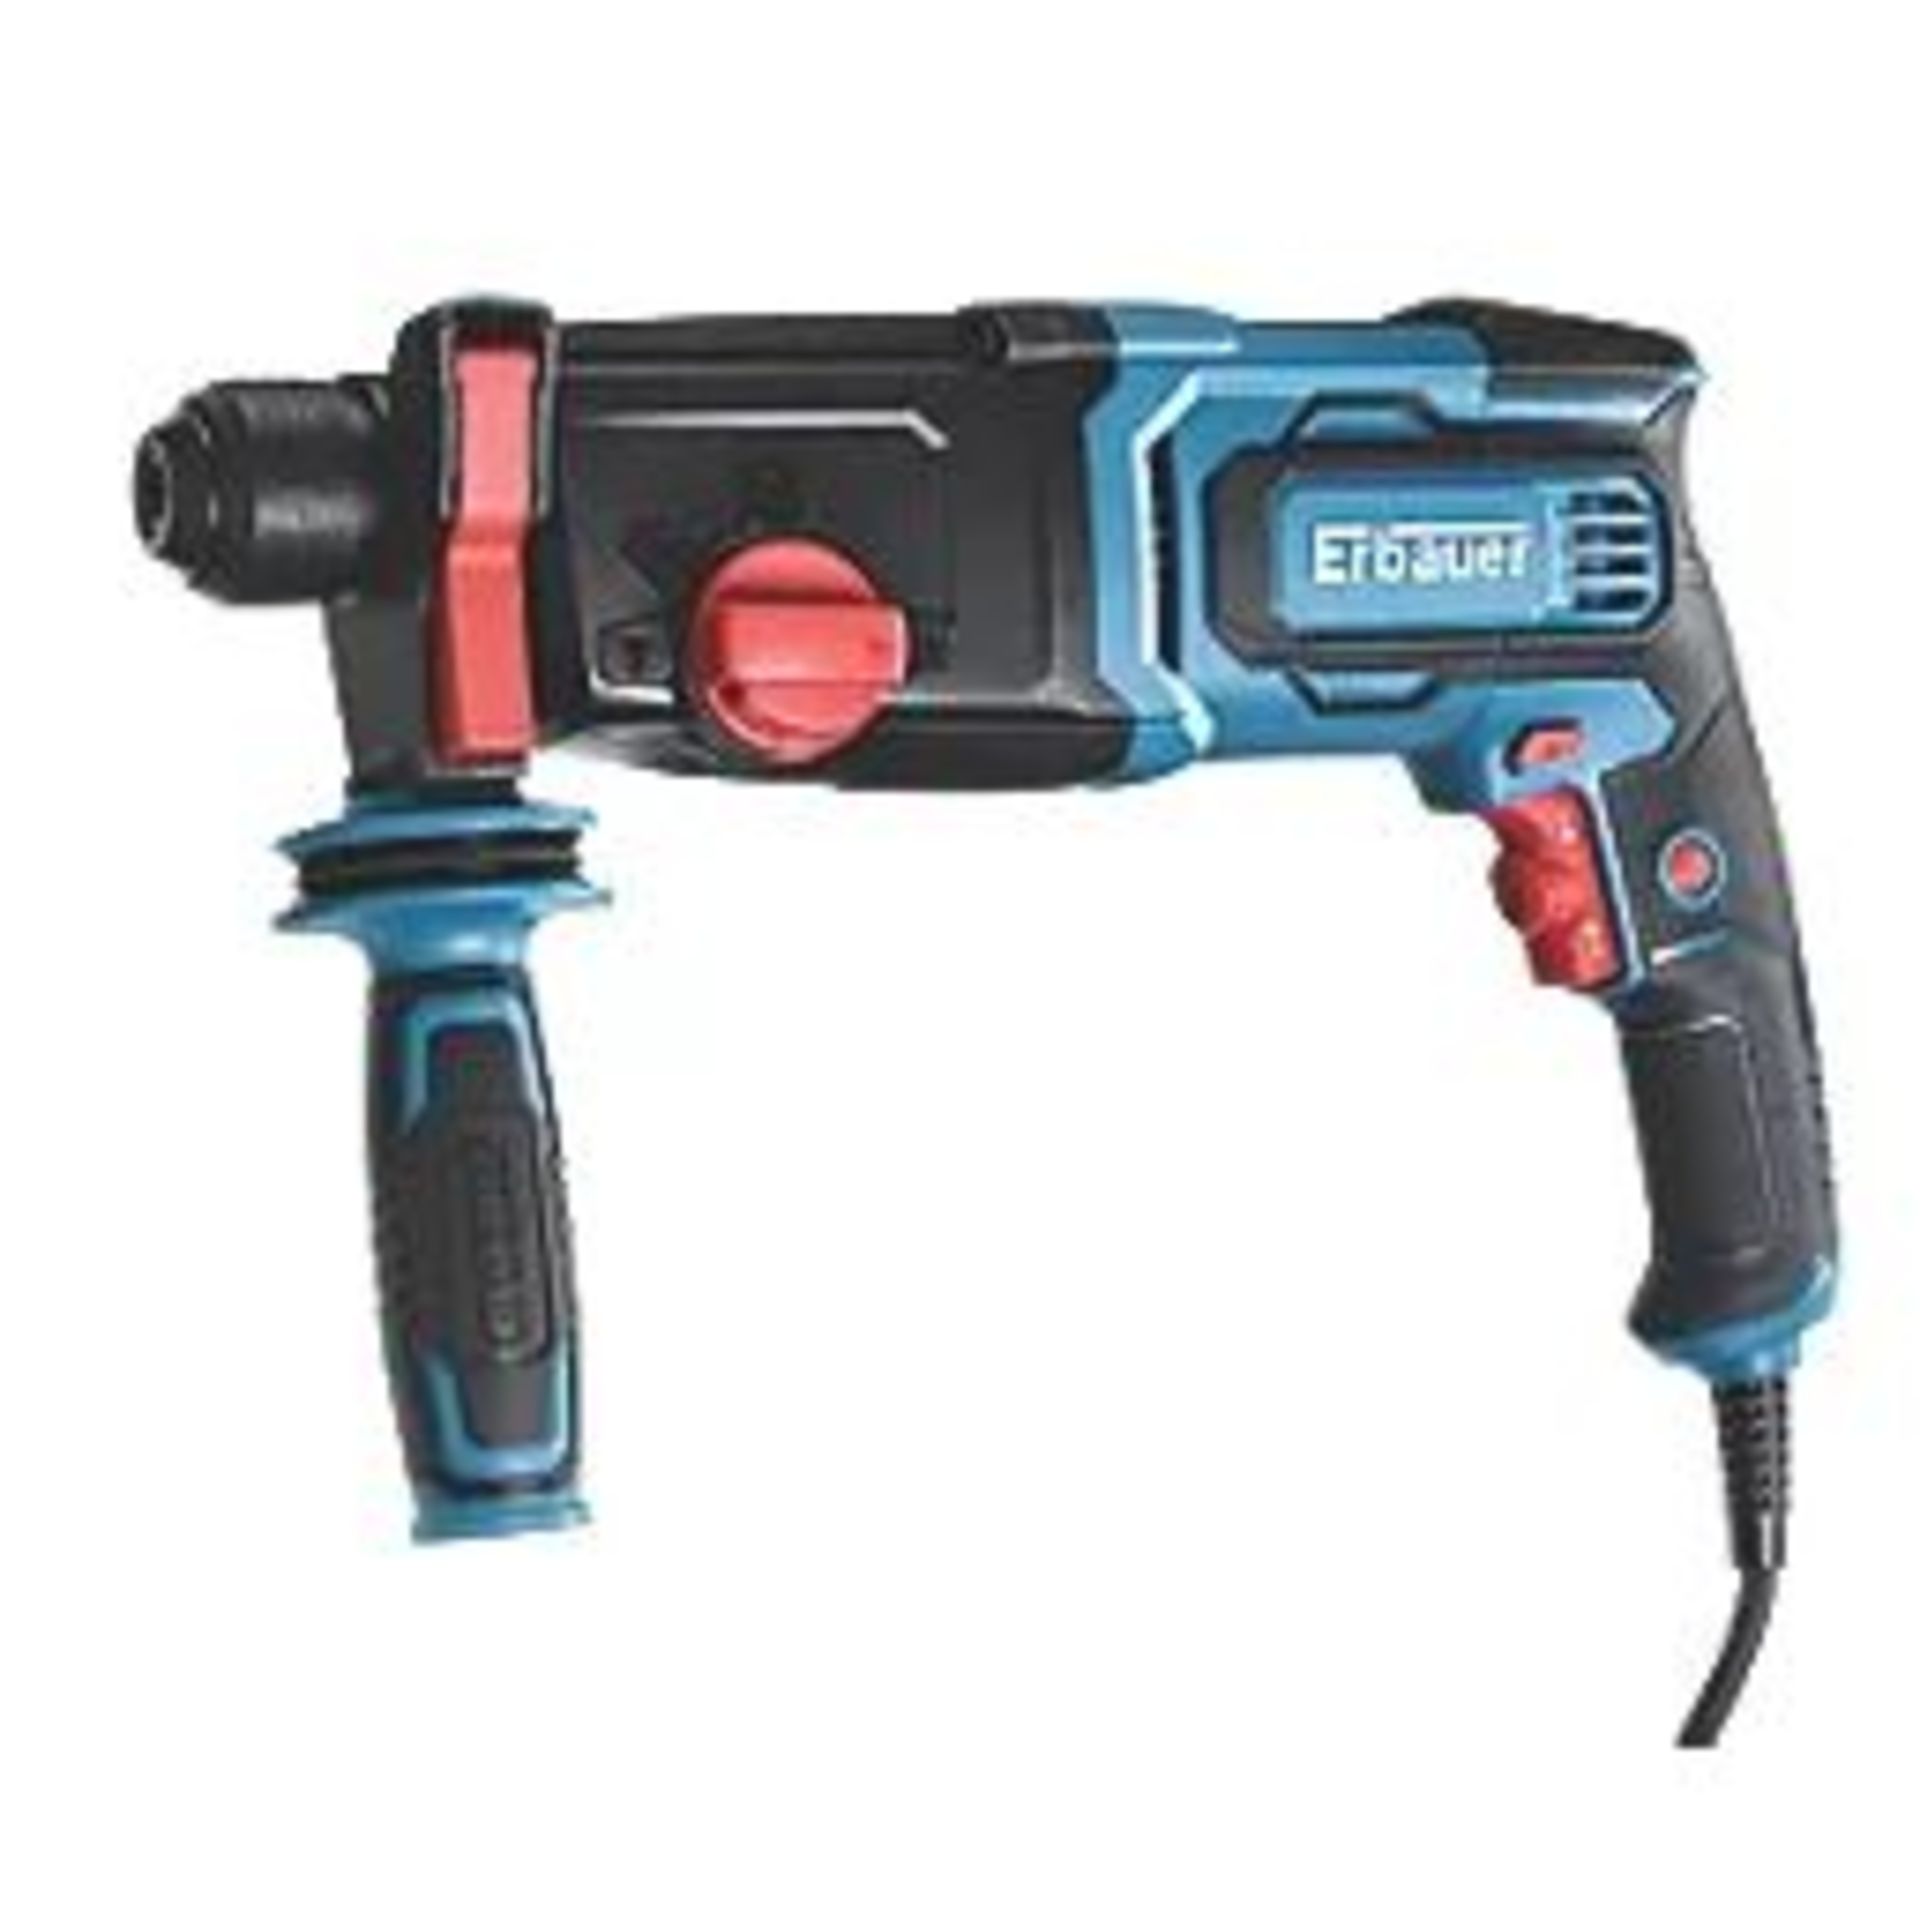 ERBAUER 3.4KG ELECTRIC SDS PLUS DRILL 220-240V. - R14.12. Powerful 750W motor. Features hammer,